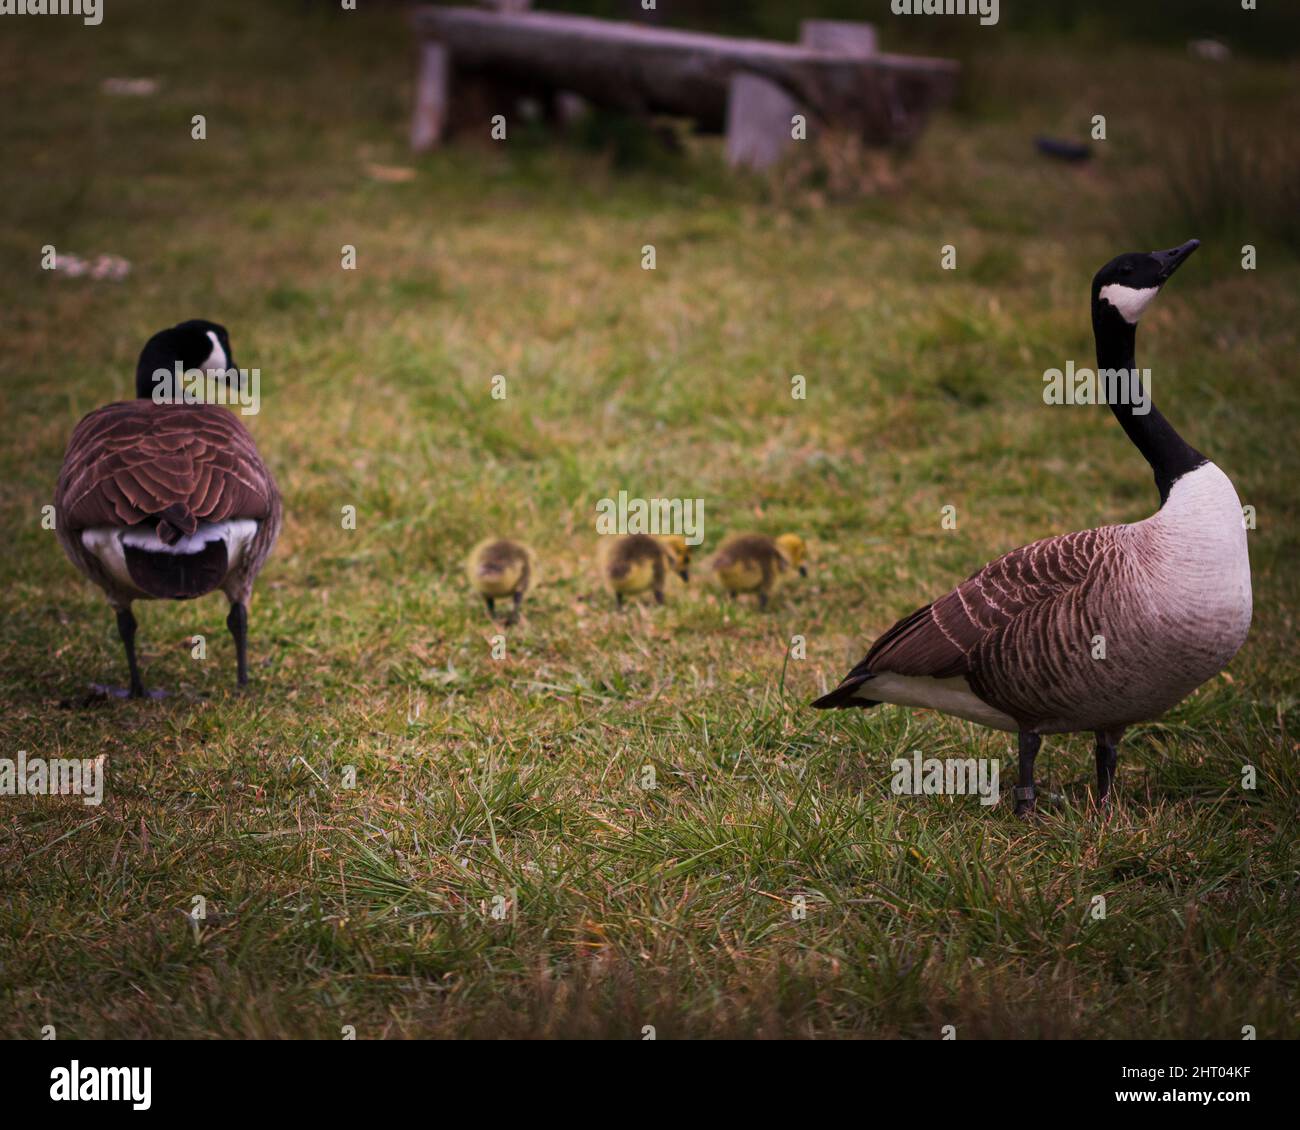 Two cute Canadian geese perched on the grass with their goslings at a farm Stock Photo